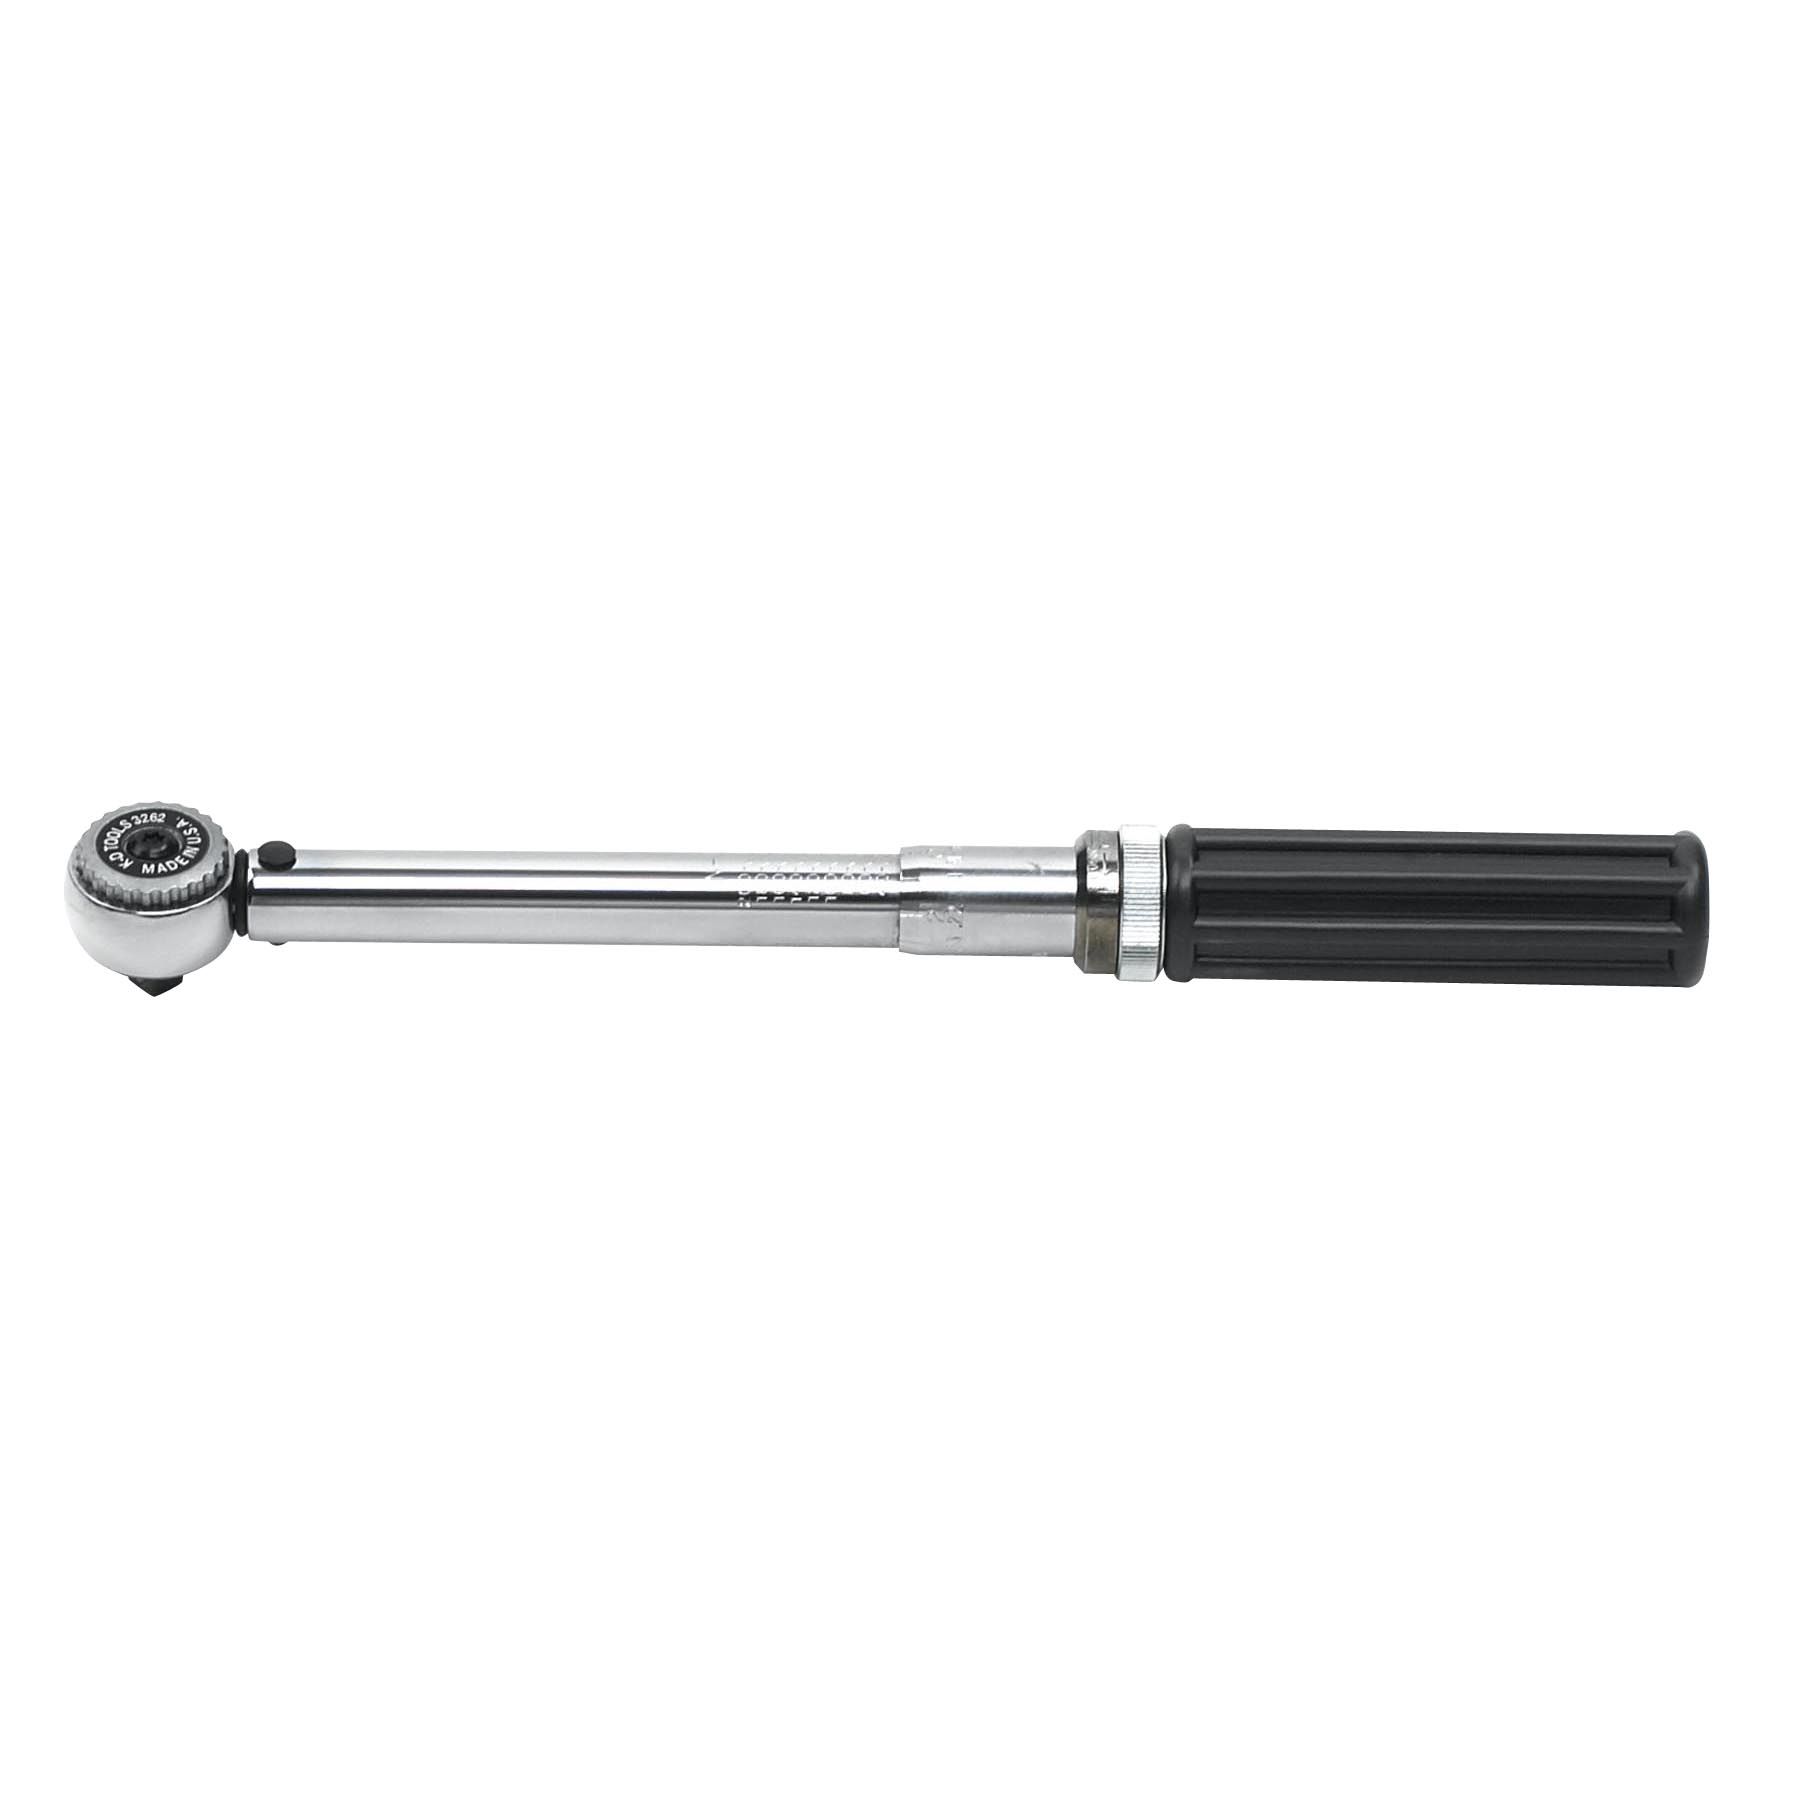 KD Tools Micrometer Torque Wrench (30 - 200 In/Lbs 1/4 in. Drive)